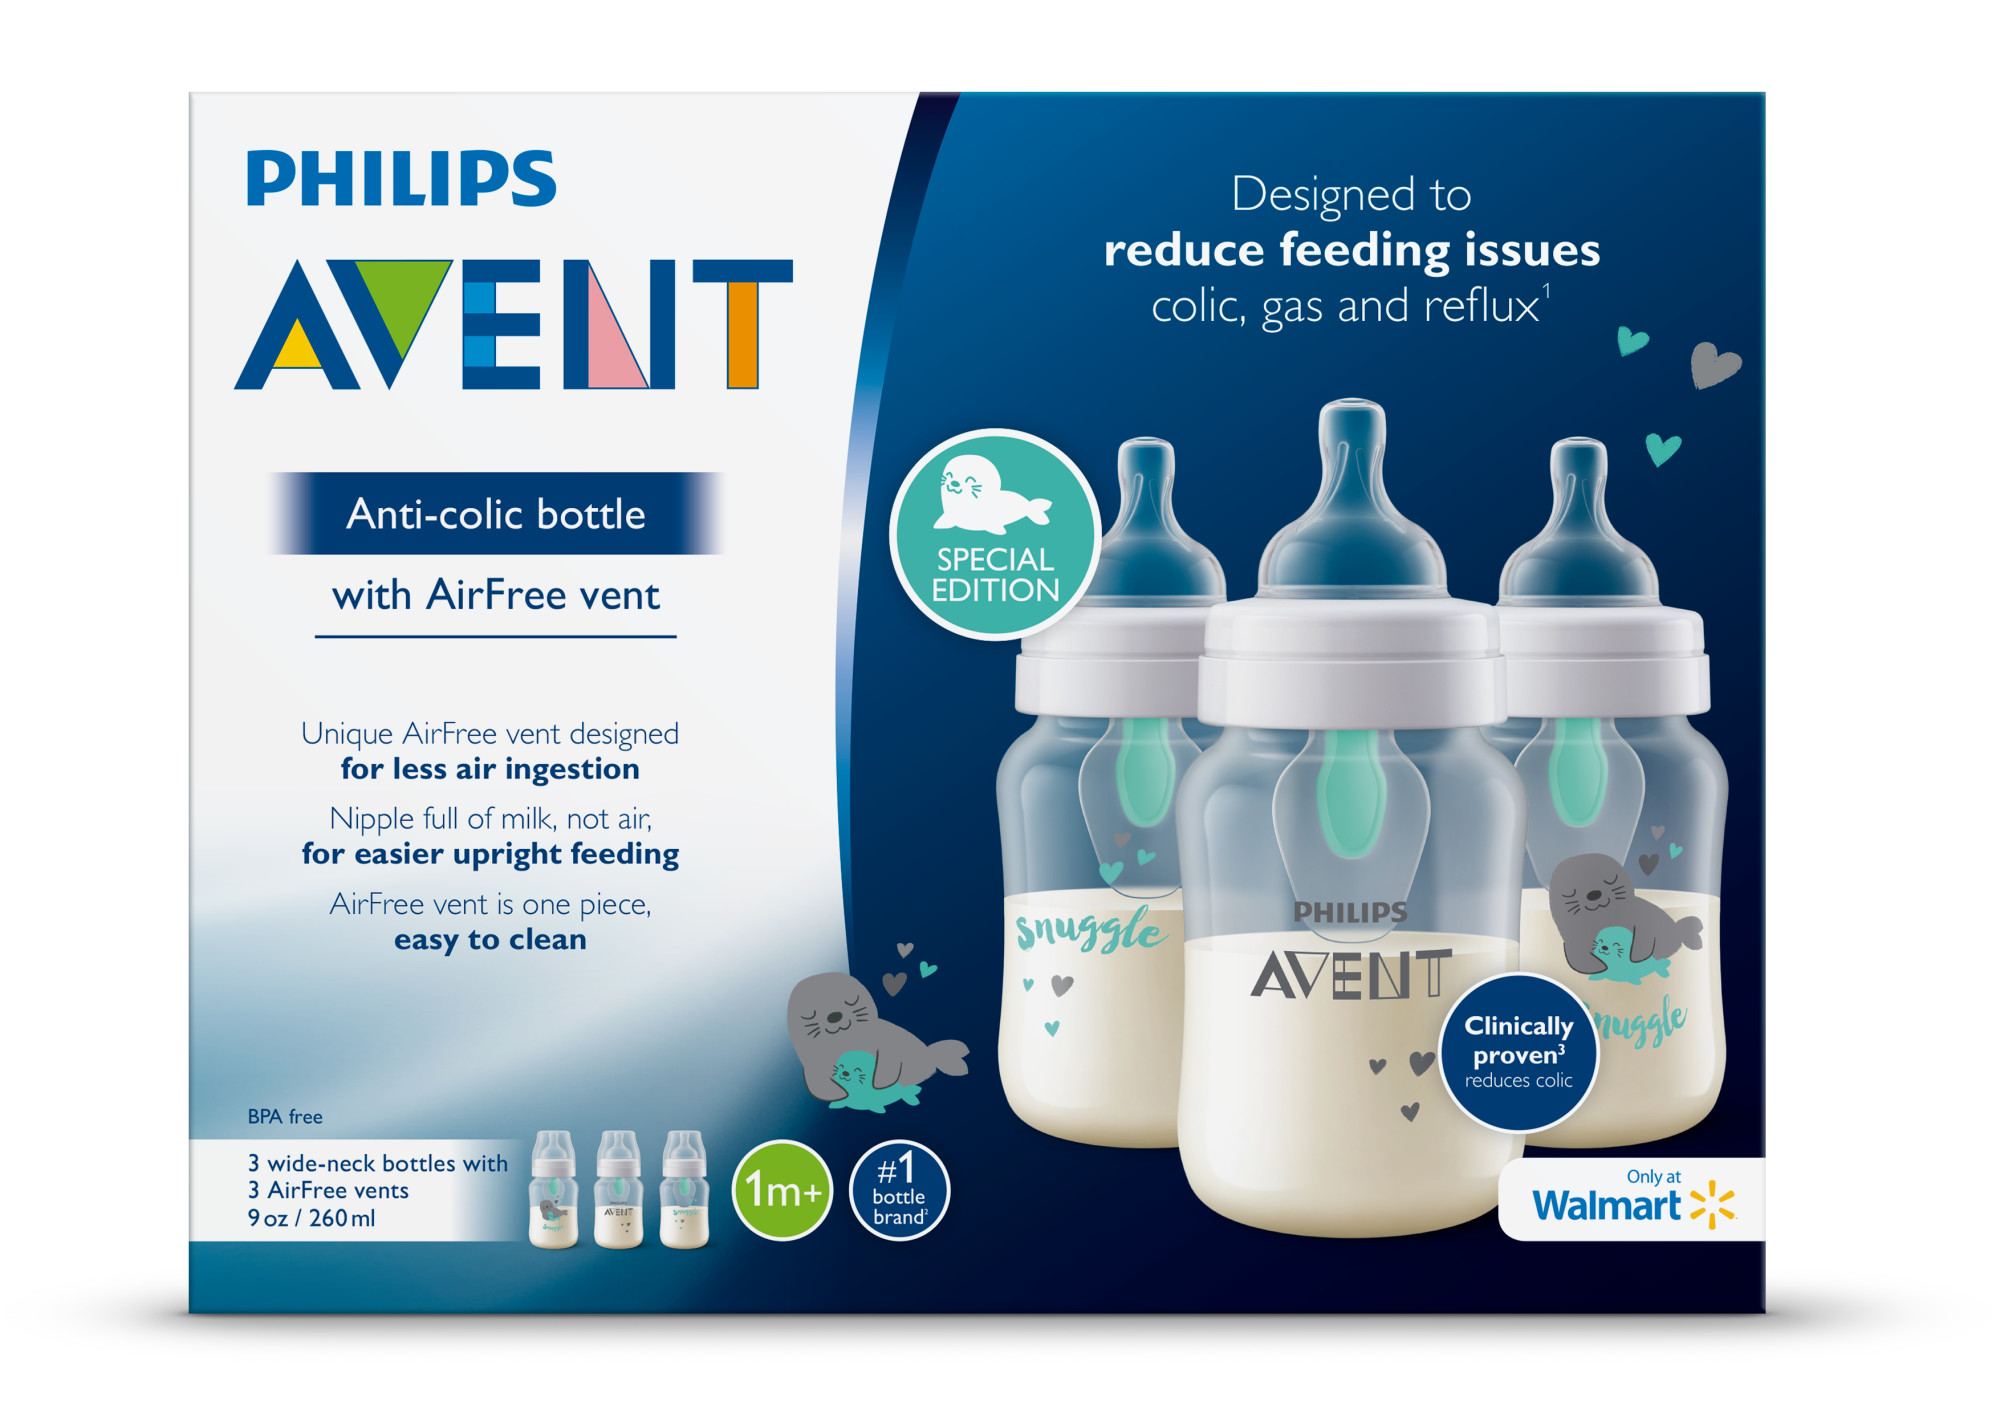 Philips Avent Anti-colic Baby Bottle with AirFree Vent with Seal Design, 9oz, 3pk, SCF408/34 - image 4 of 6